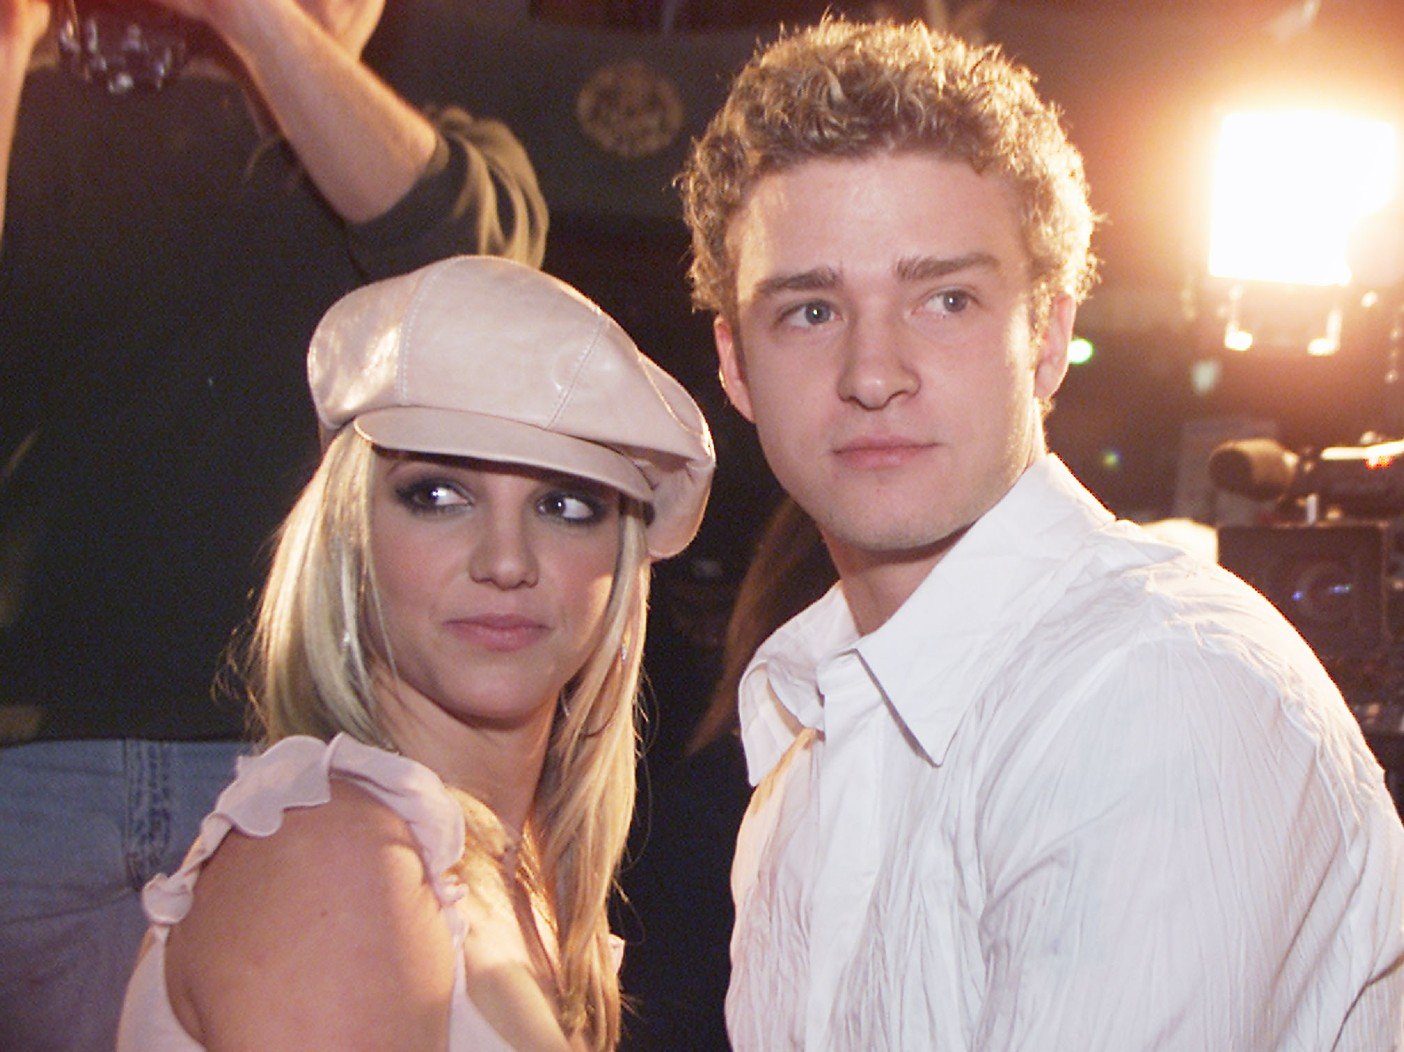 Fans Upset With Justin Timberlake For ‘Having A Tantrum’ Over Britney Spears Pregnancy